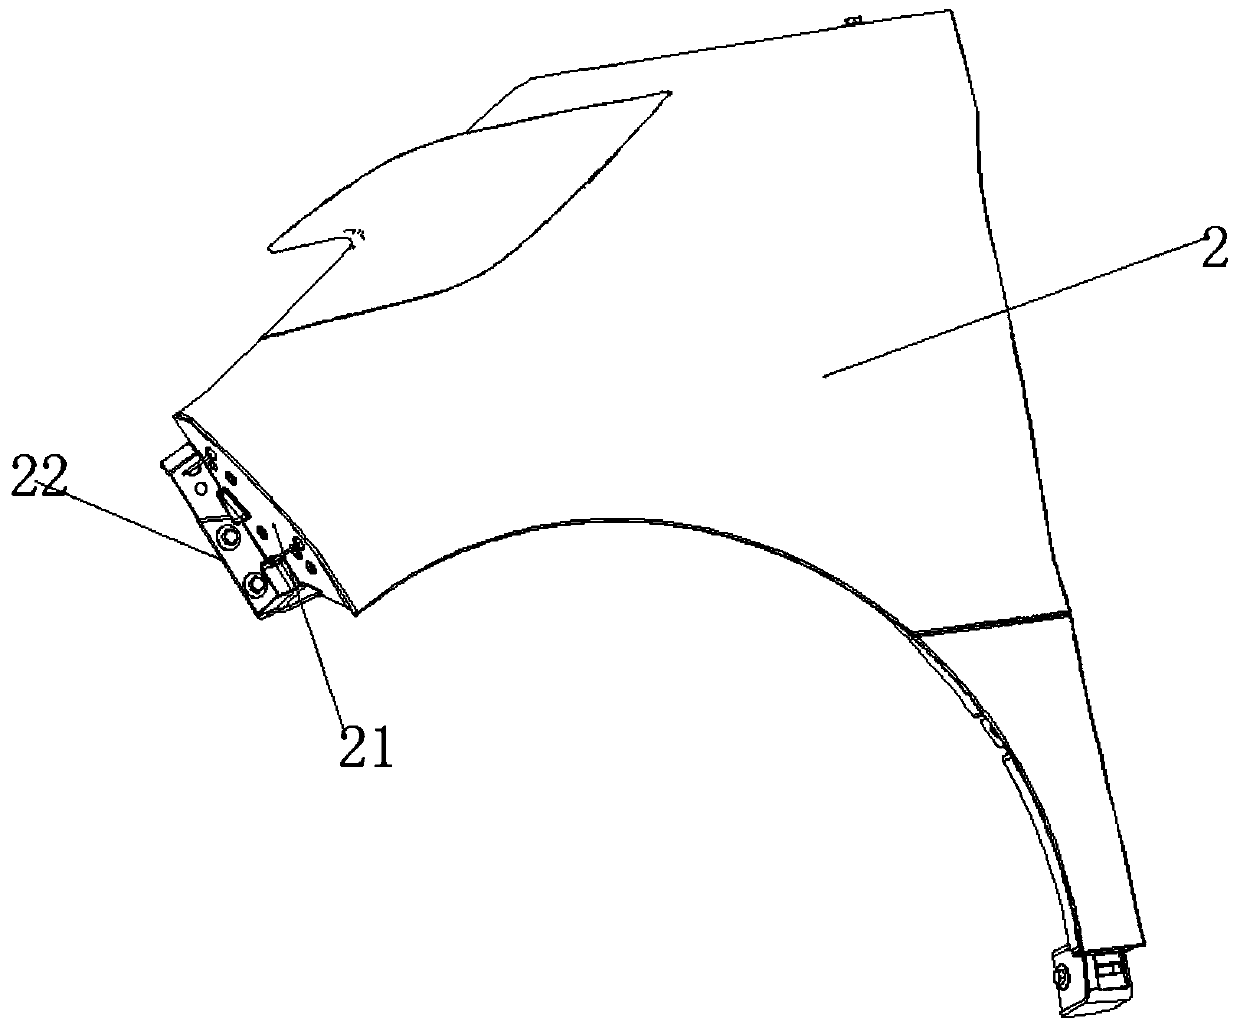 Plug-in type fender structure